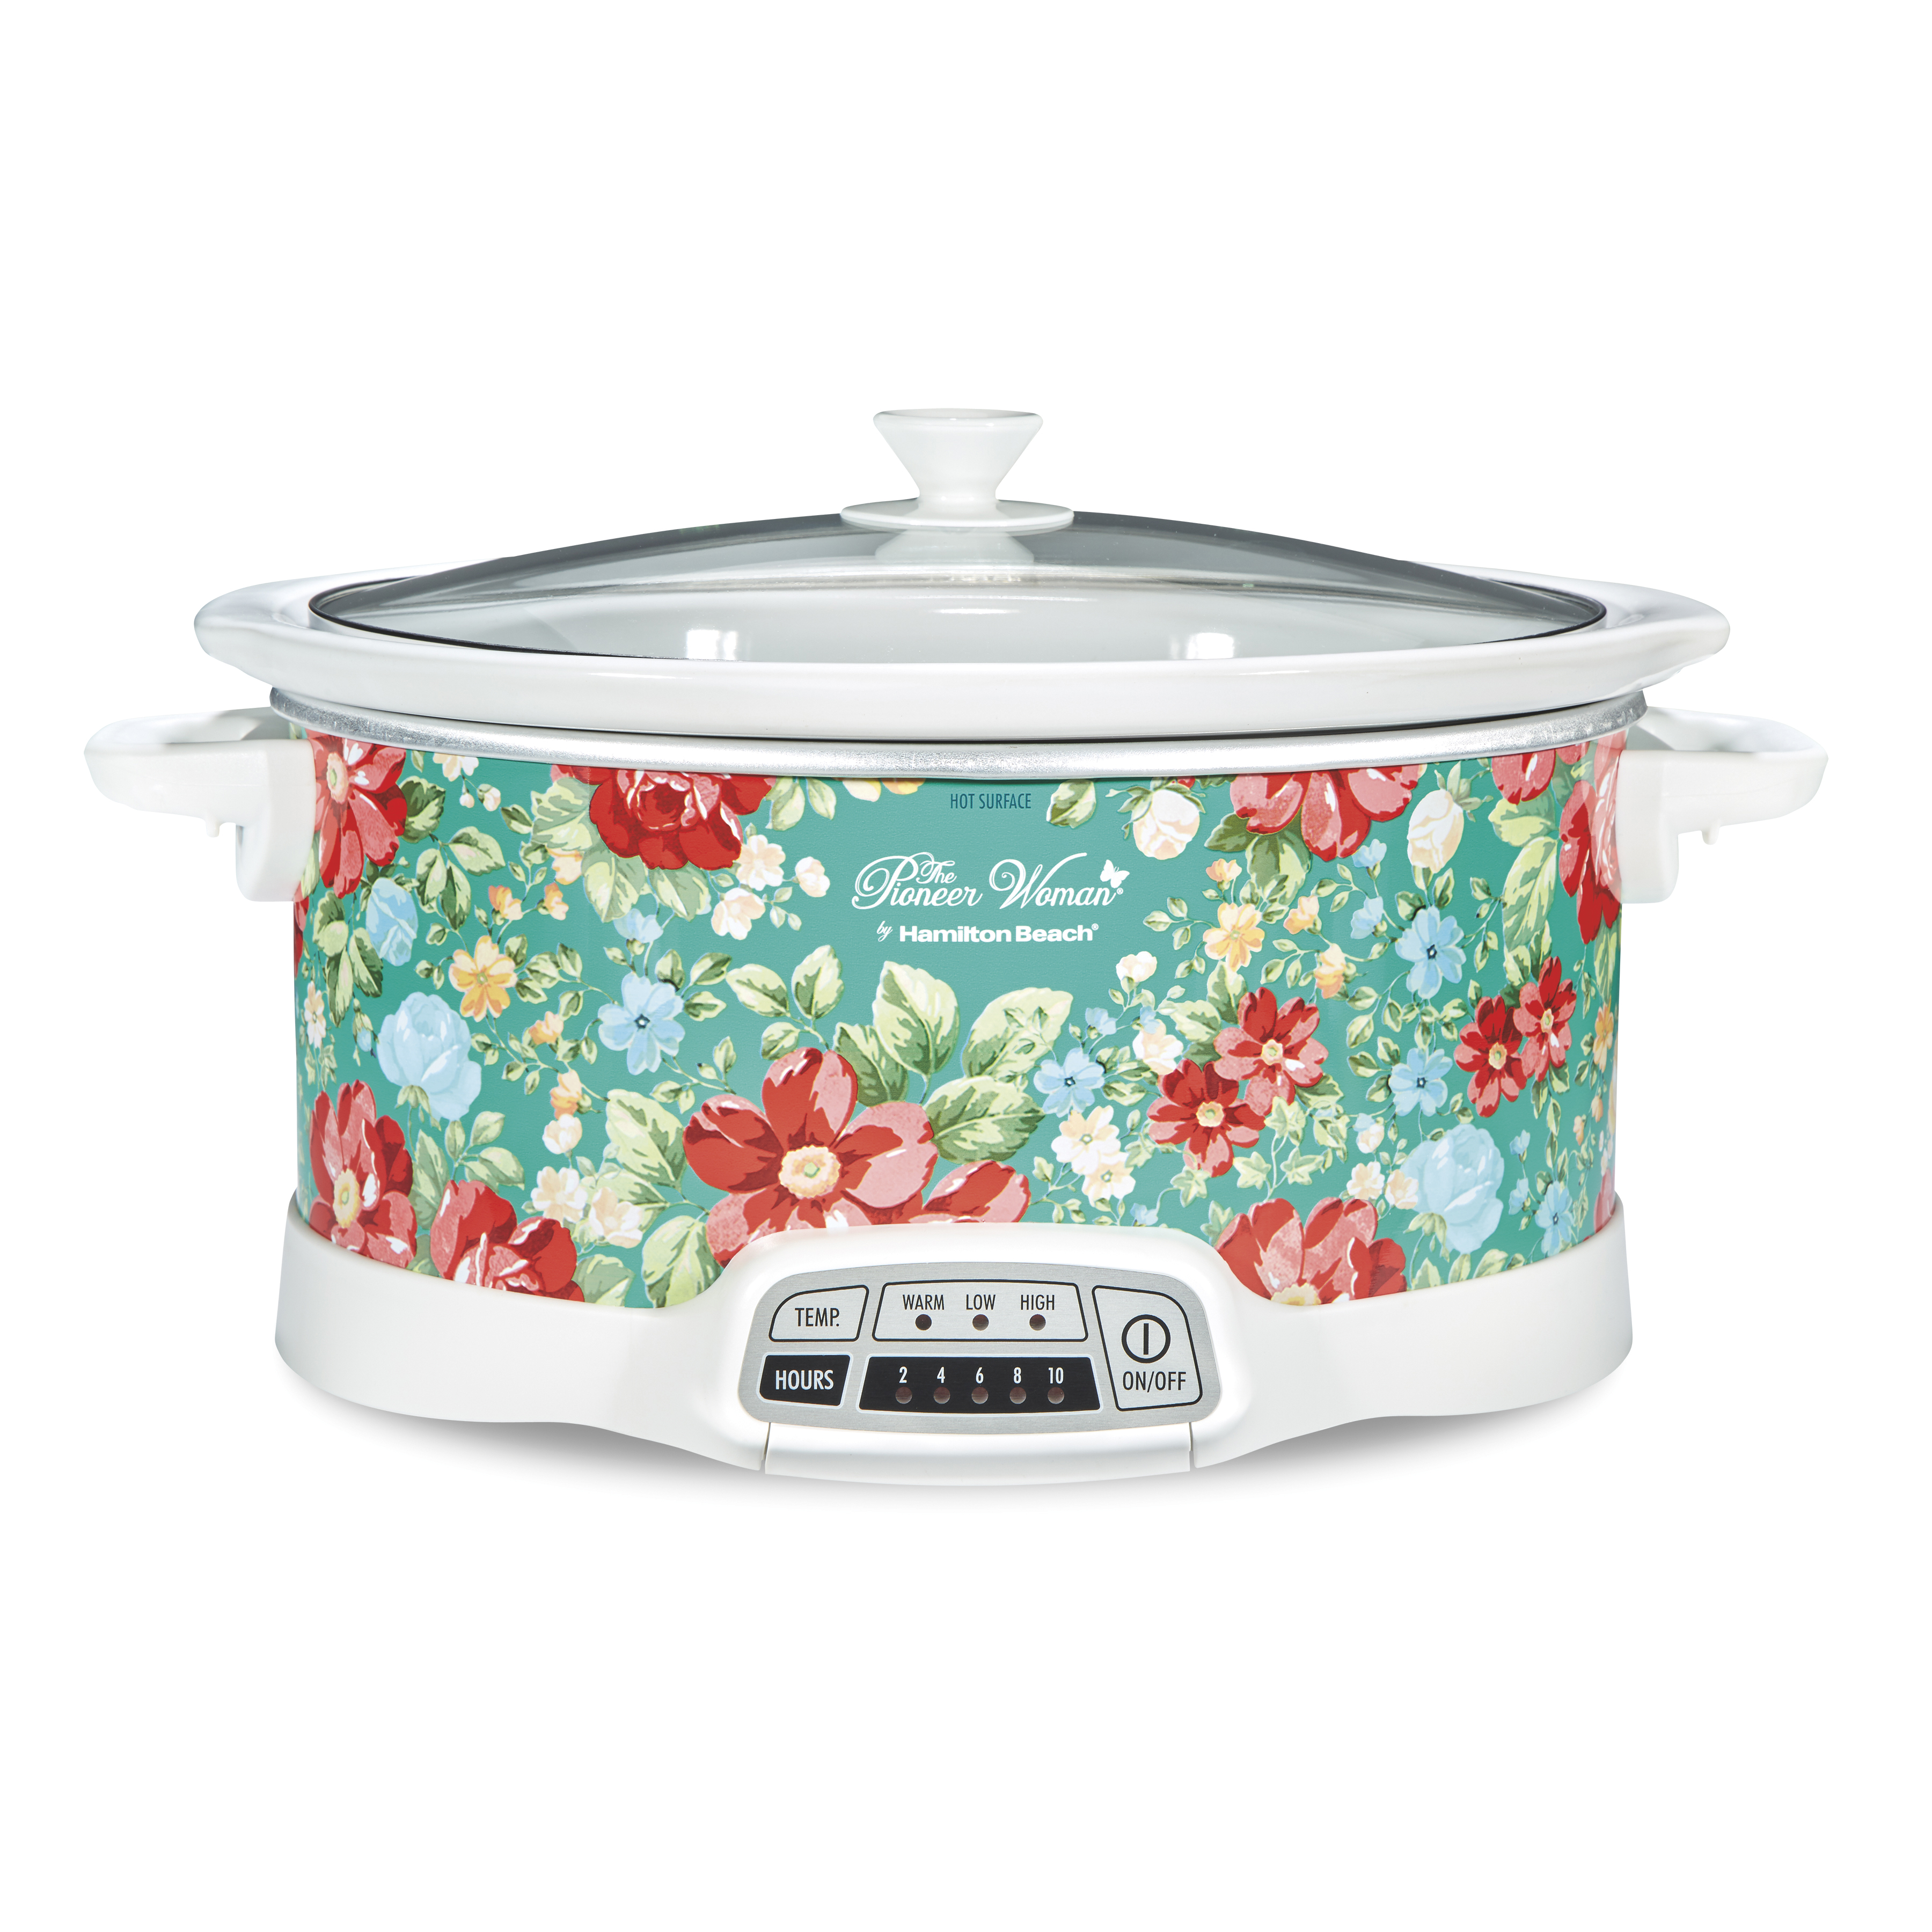 The Pioneer Woman Programmable Slow Cooker, 7 Quart Capacity, Removable Crock, Vintage Floral, 33479 - image 2 of 2